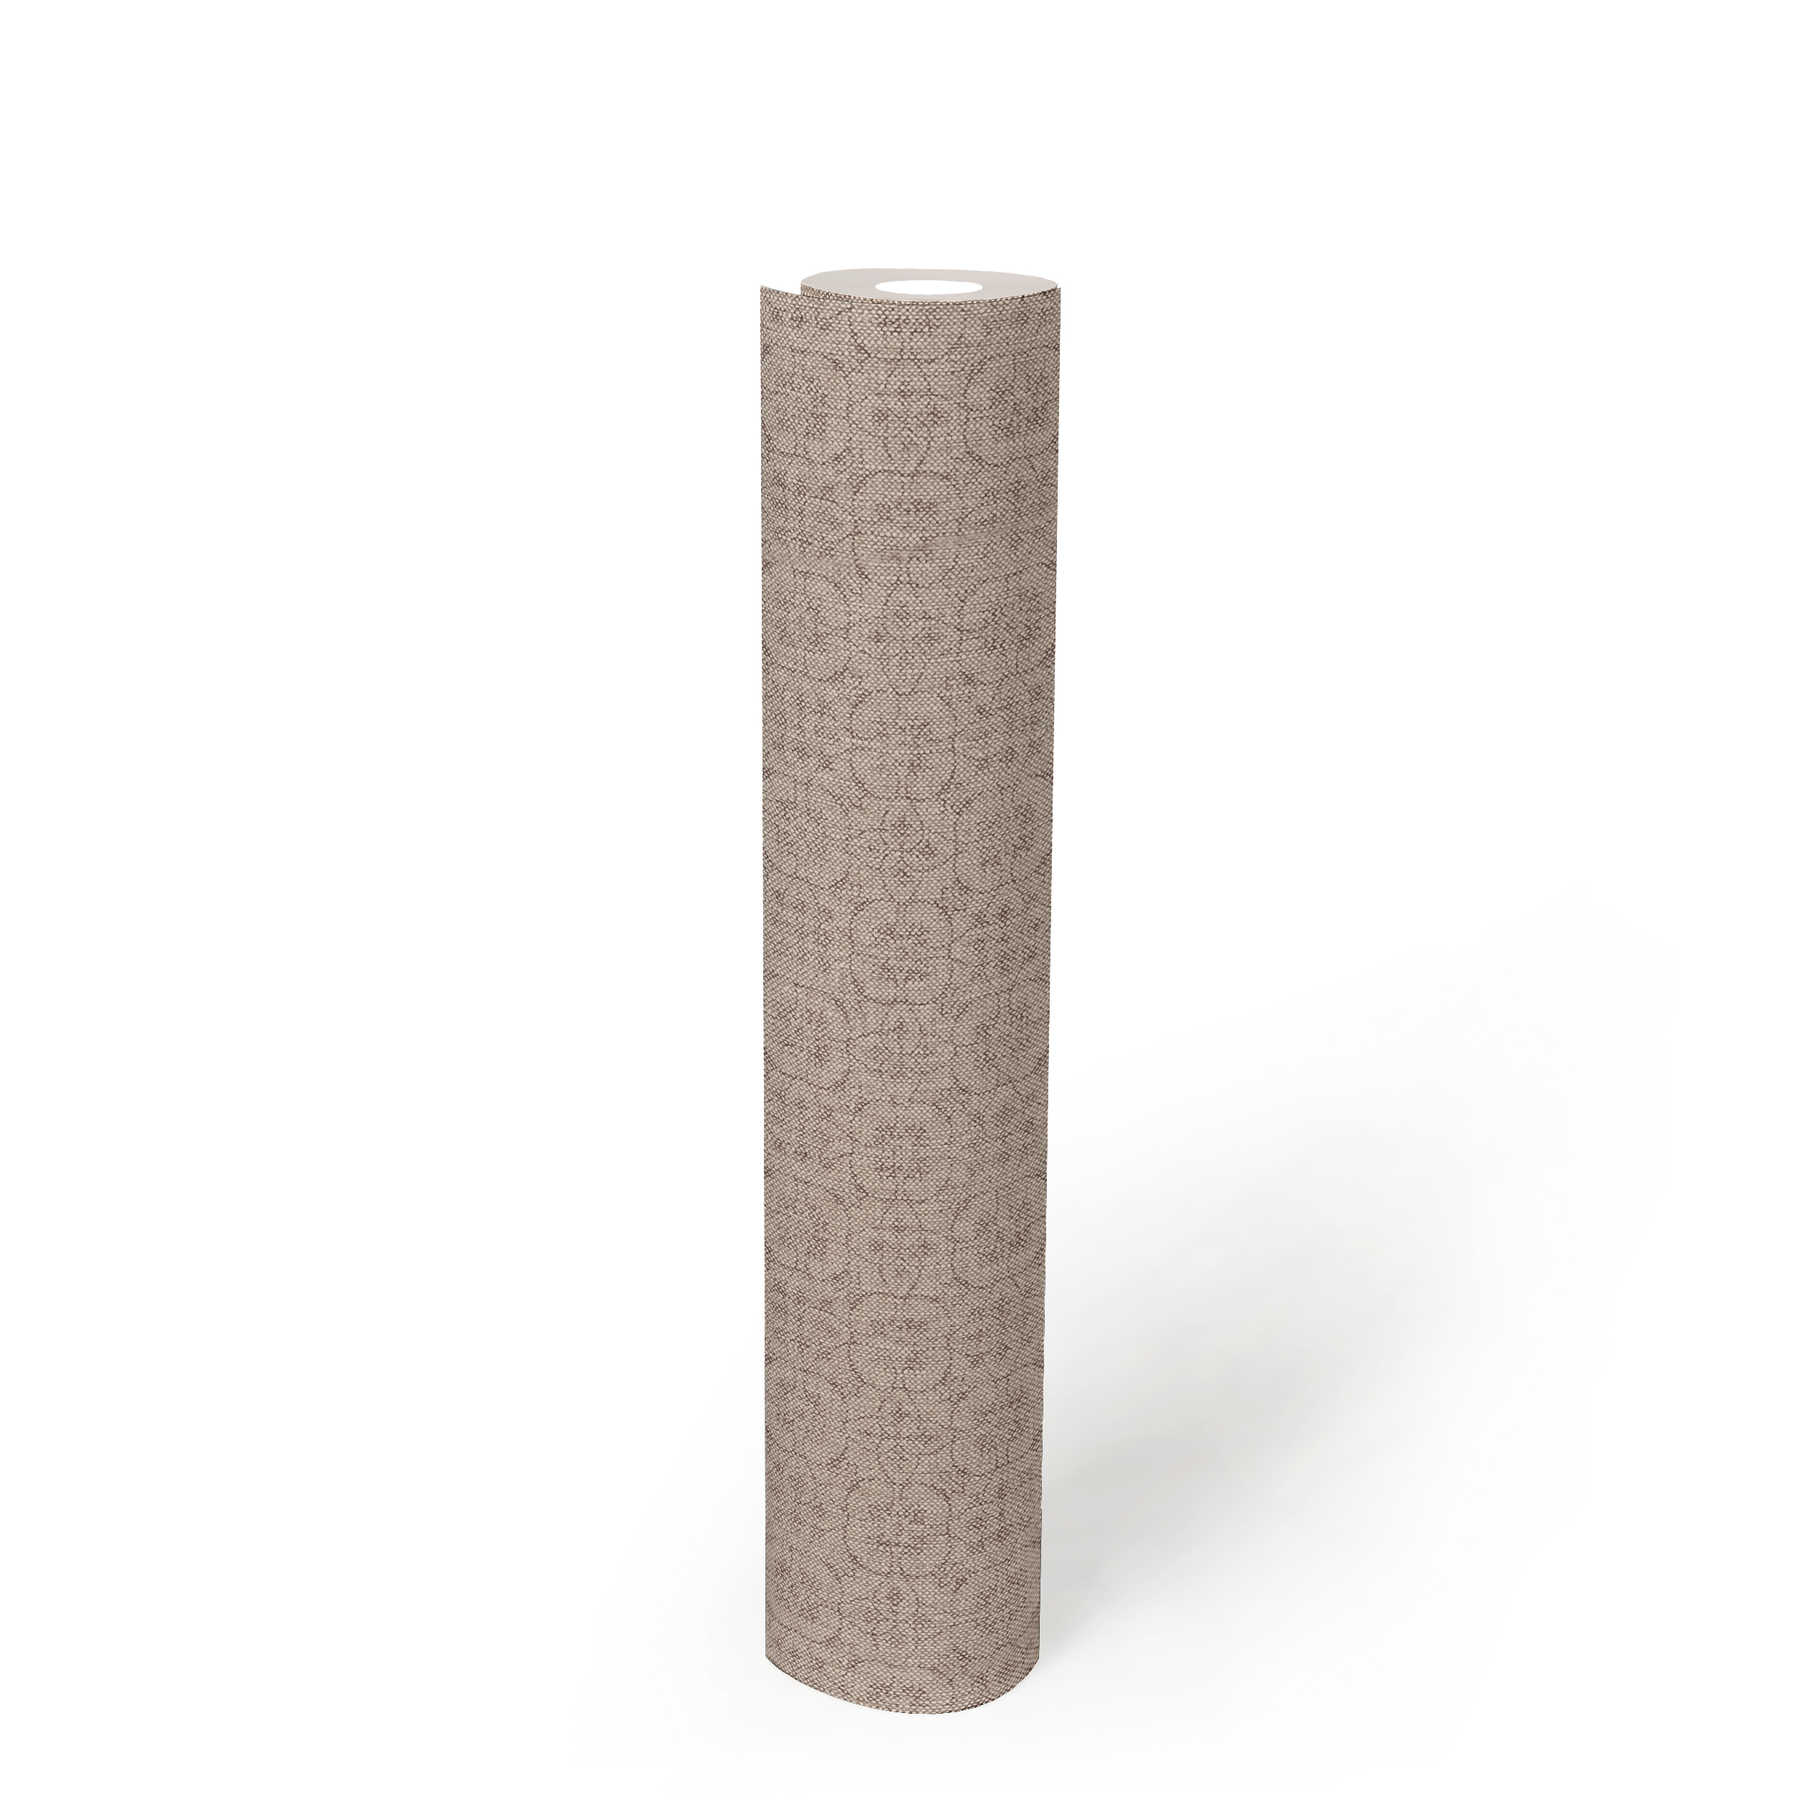             Linen look wallpaper with scandi style pattern - brown
        